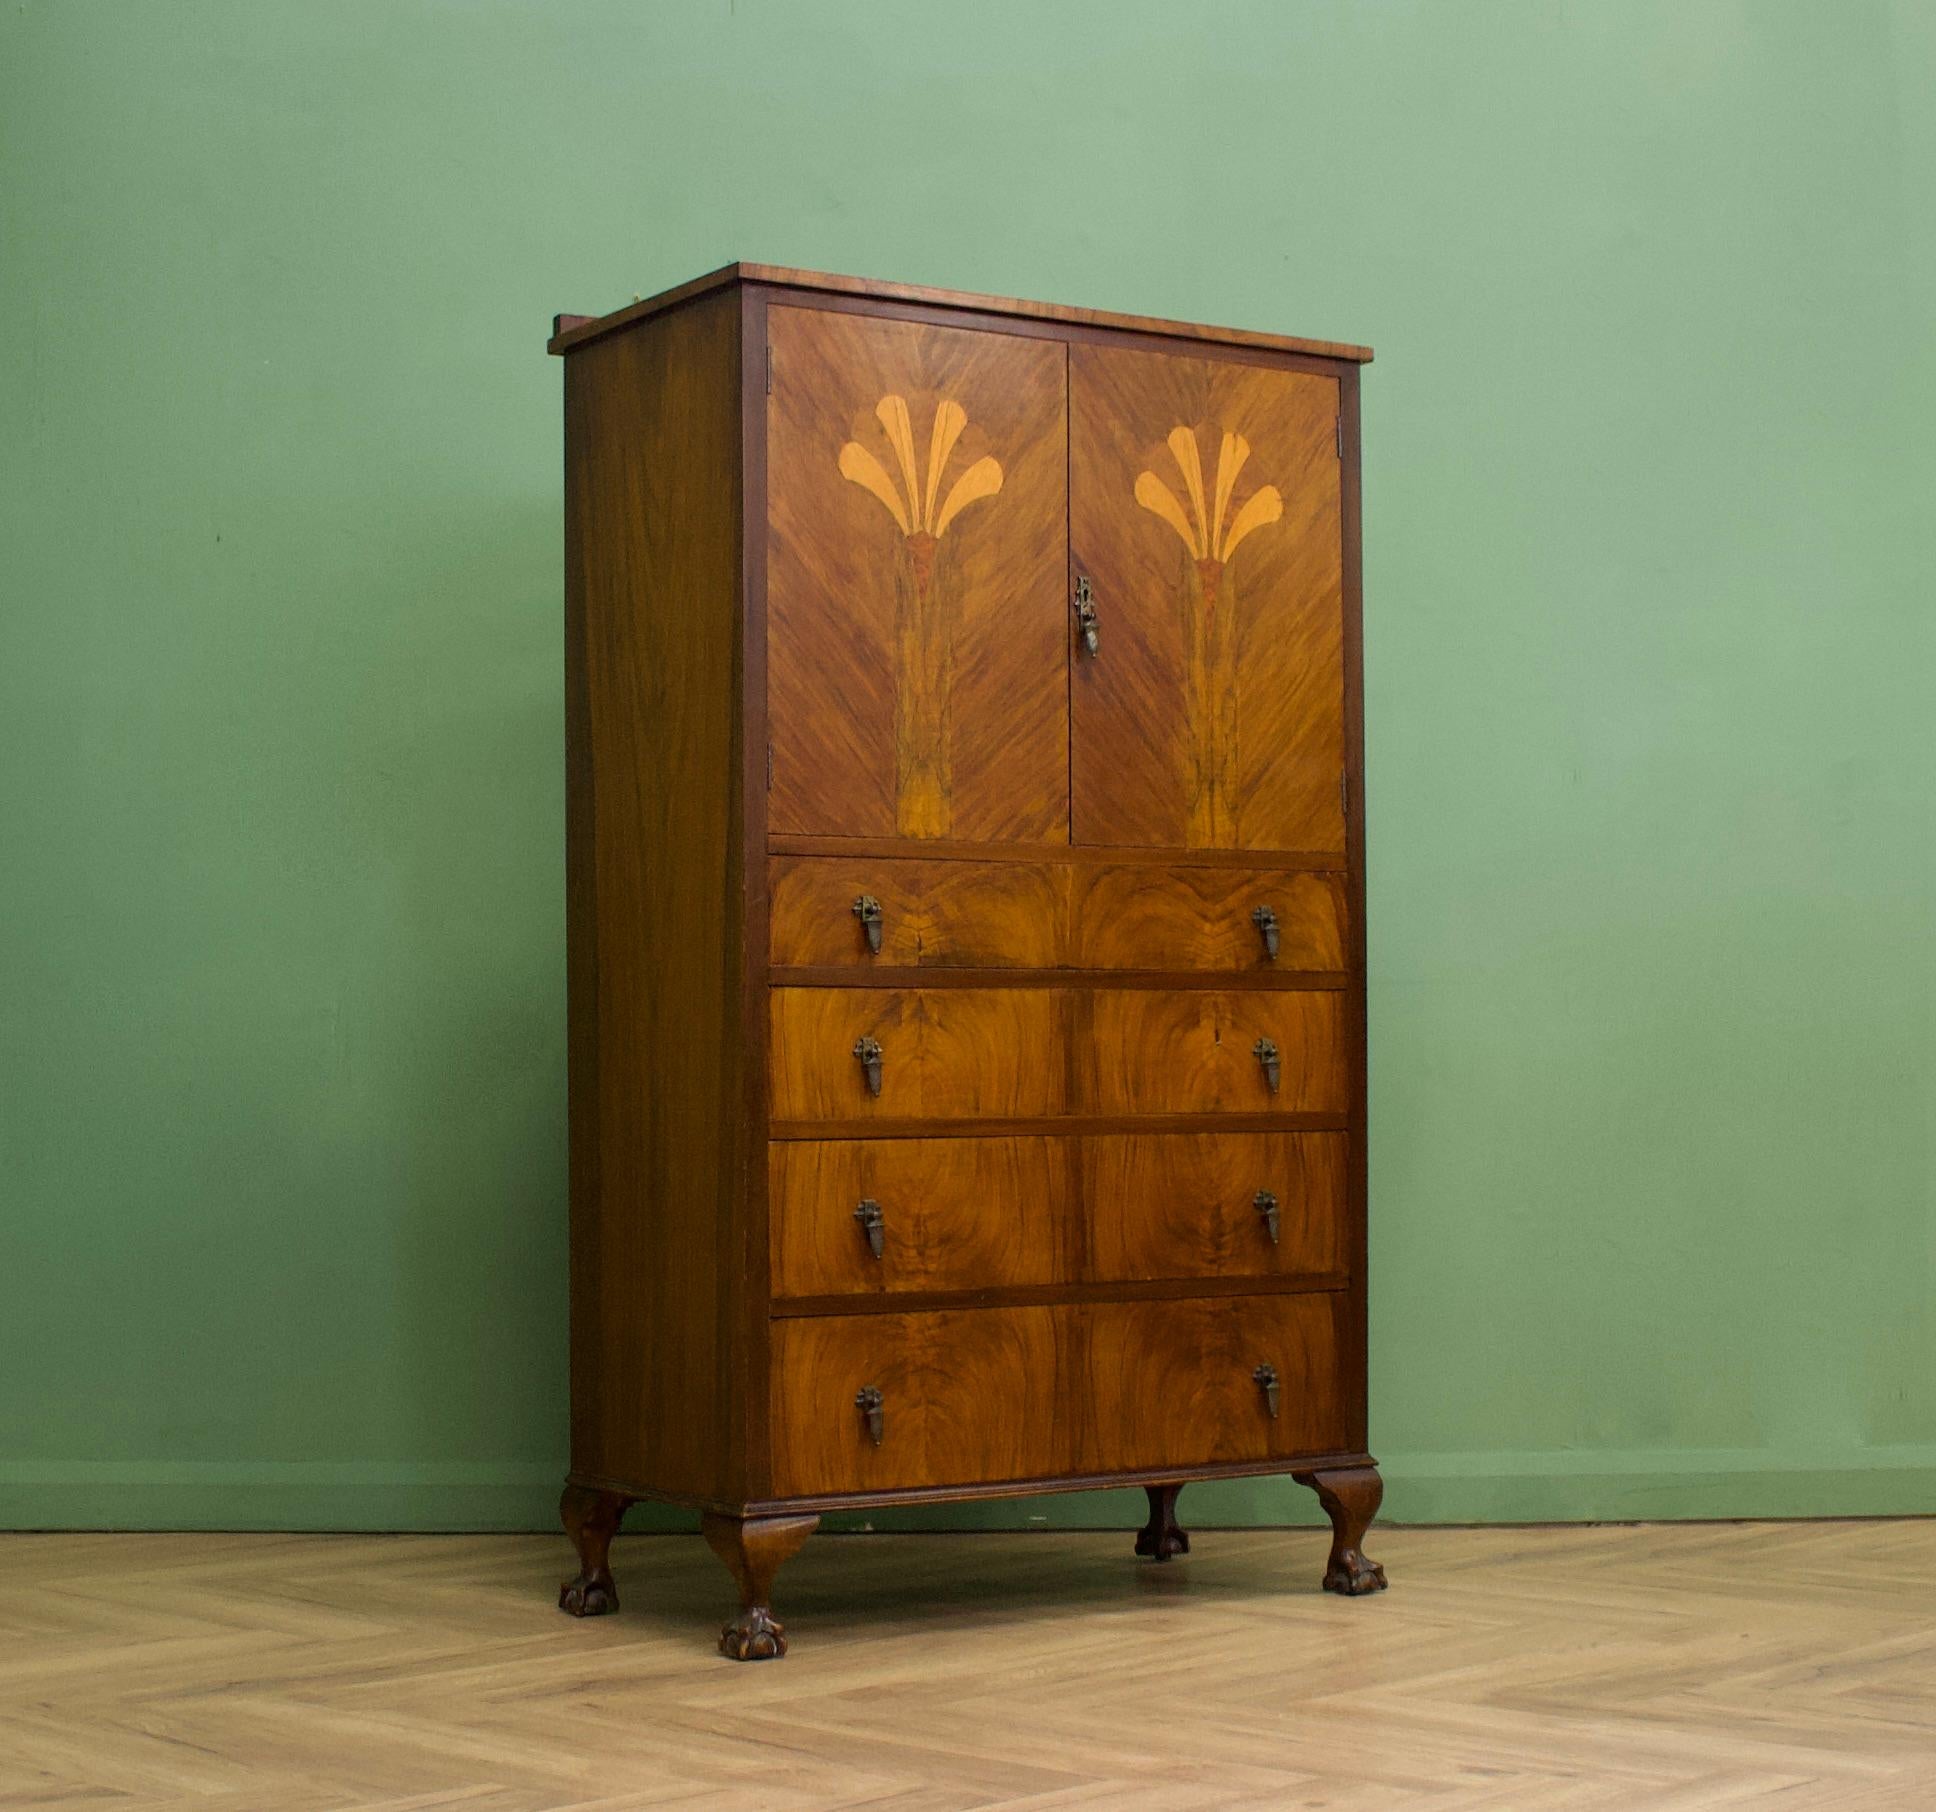 A vintage 1930s Art Deco linen cabinet / tallboy, featuring marquetry inlaid with walnut veneers
There is a cupboard with a shelf and four drawers